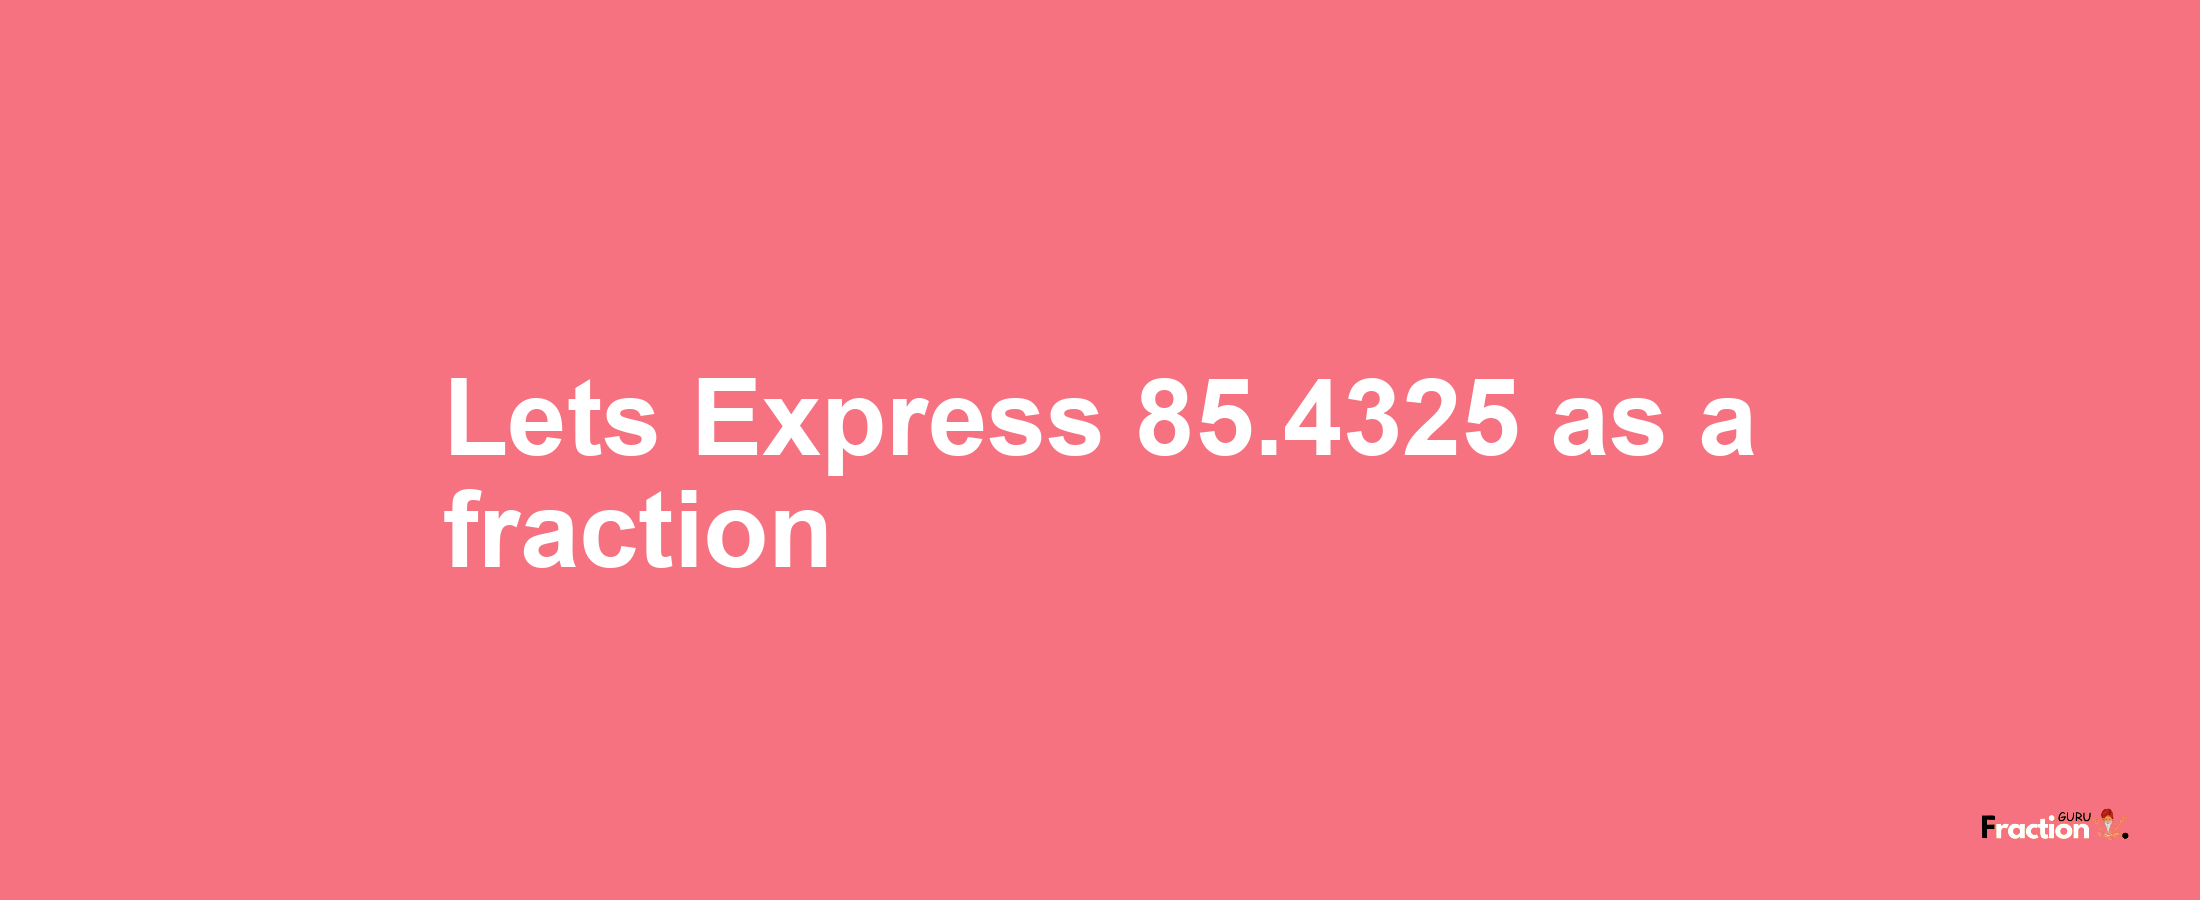 Lets Express 85.4325 as afraction